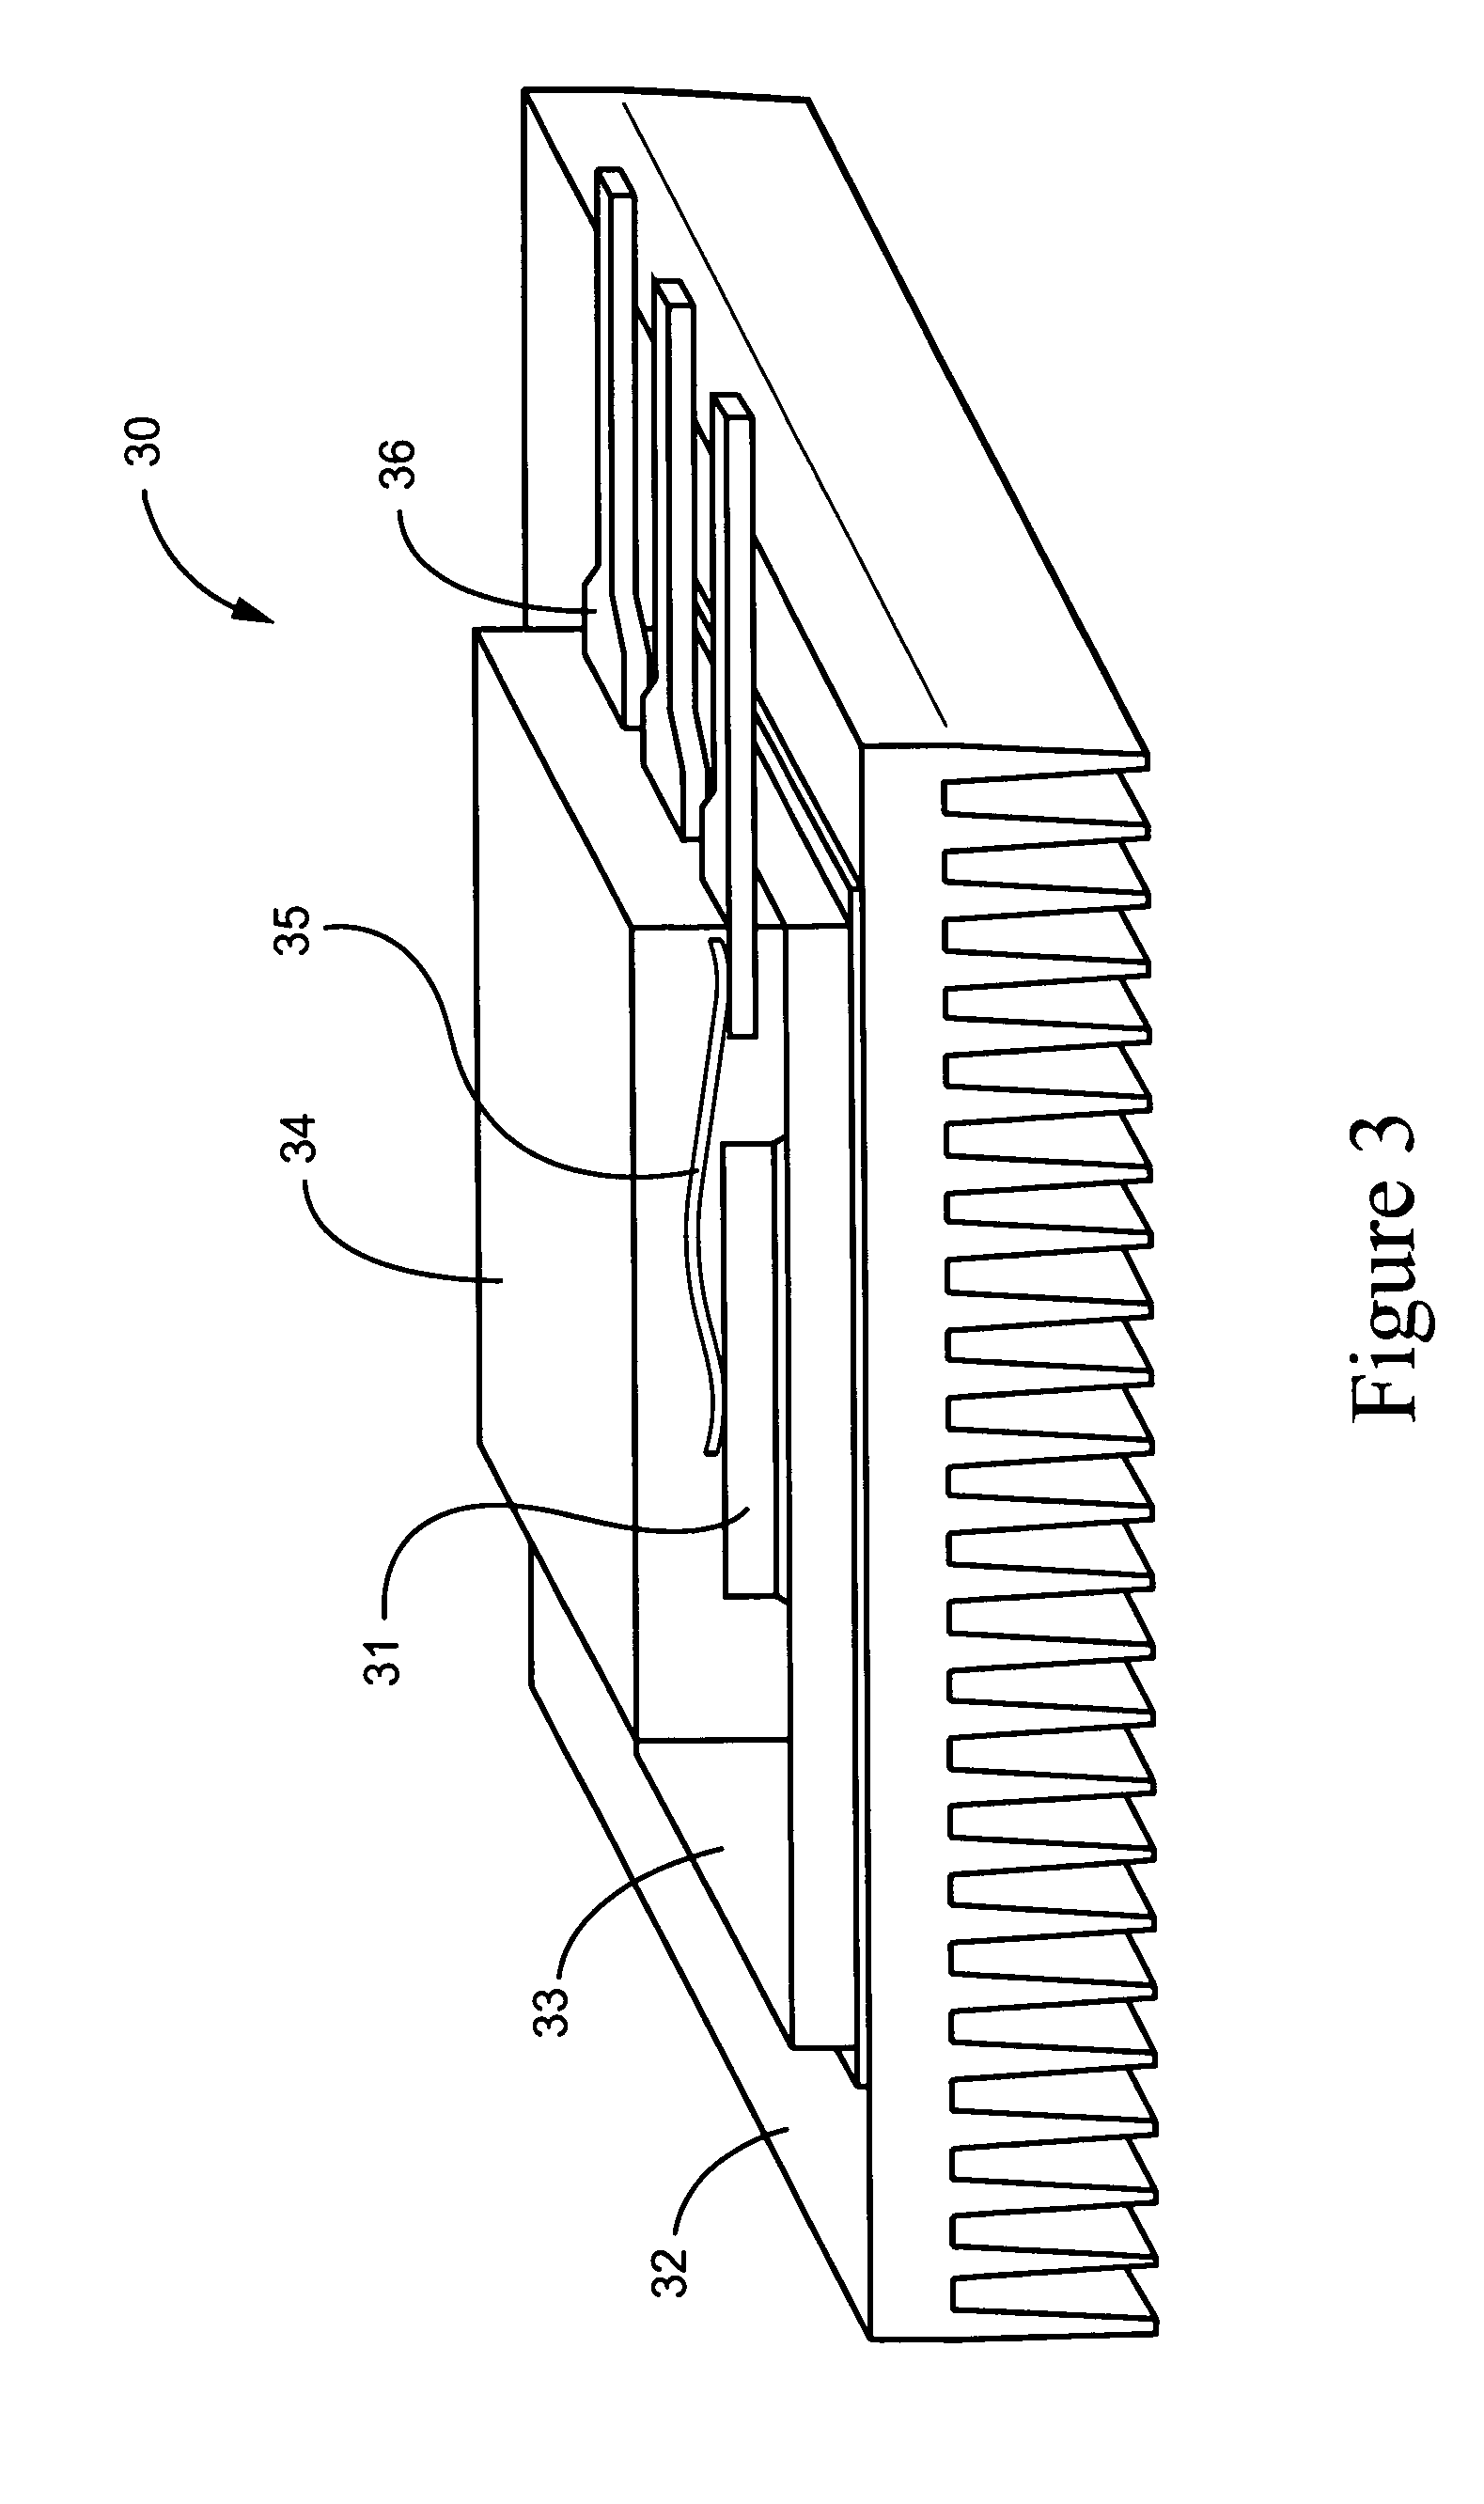 Tailorable titanium-tungsten alloy material thermally matched to semiconductor substrates and devices